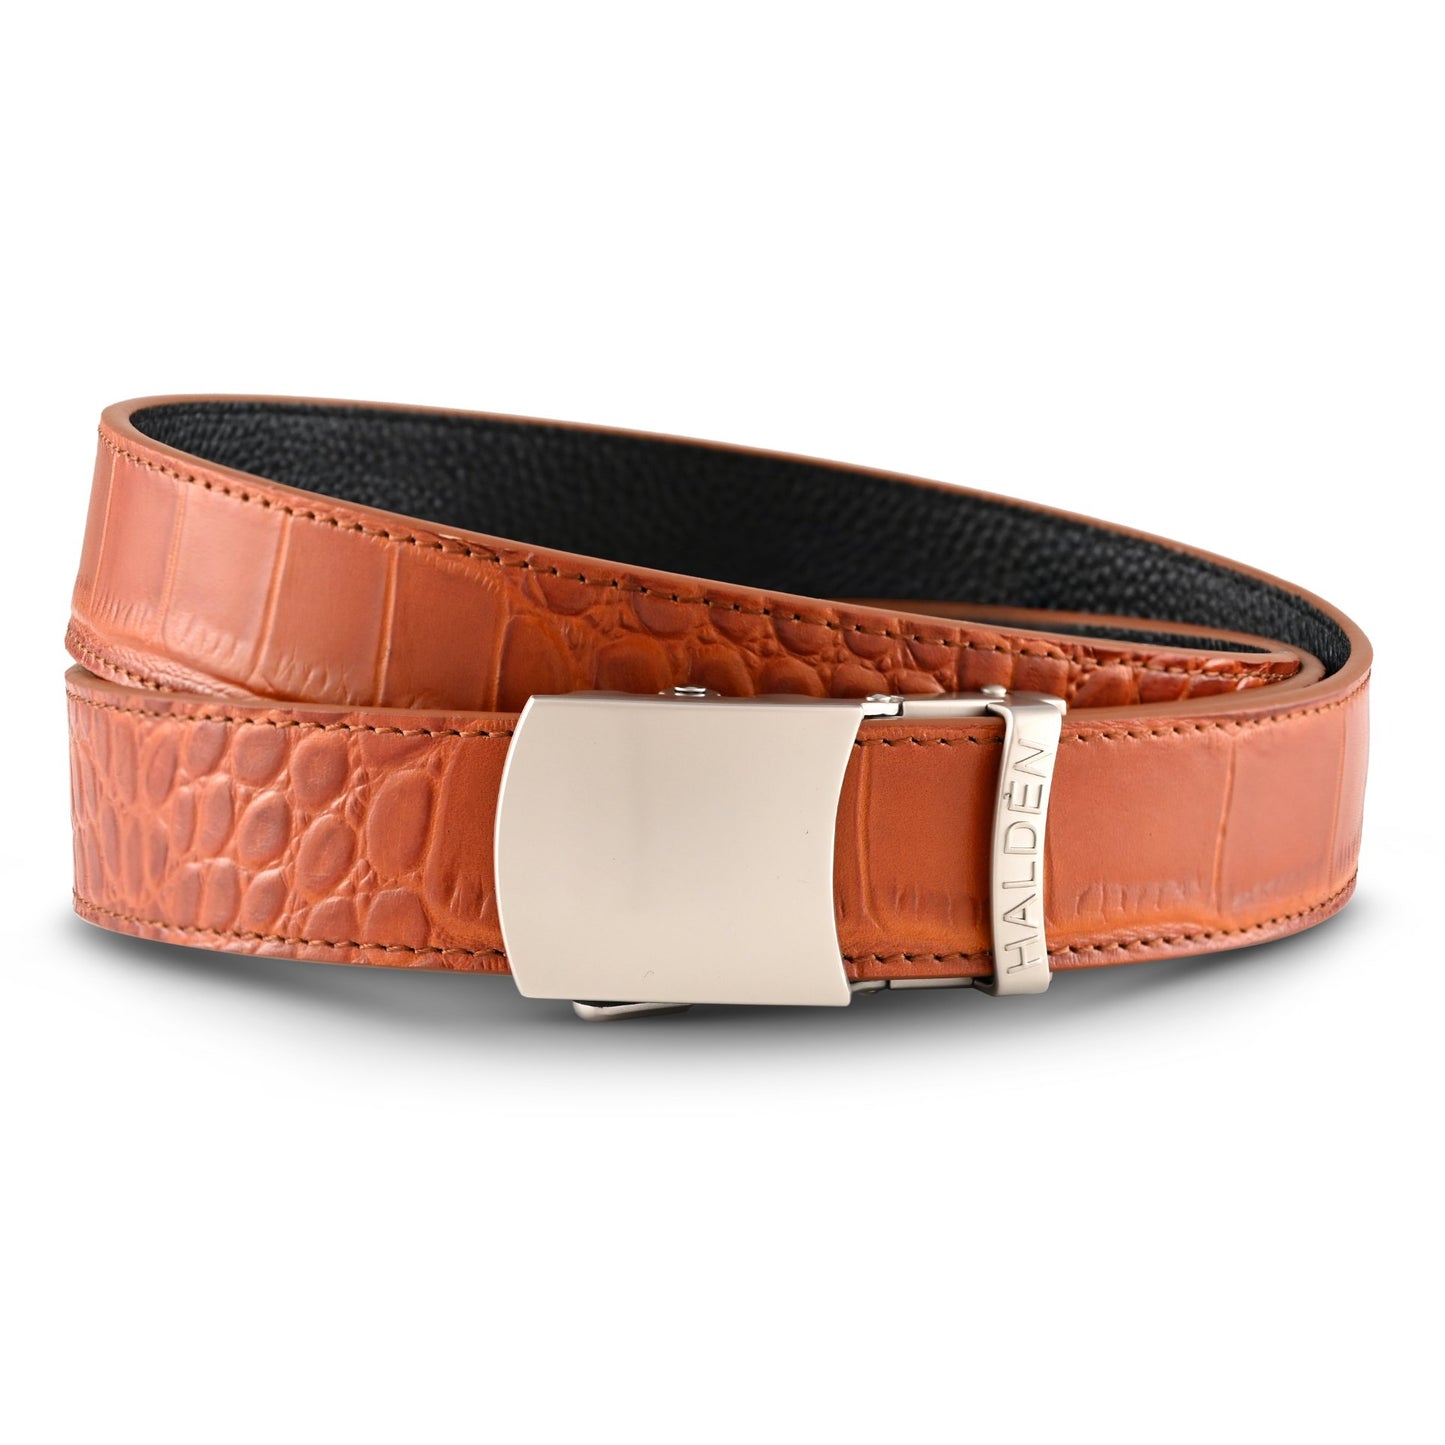 Daven Tan with vintage buckle